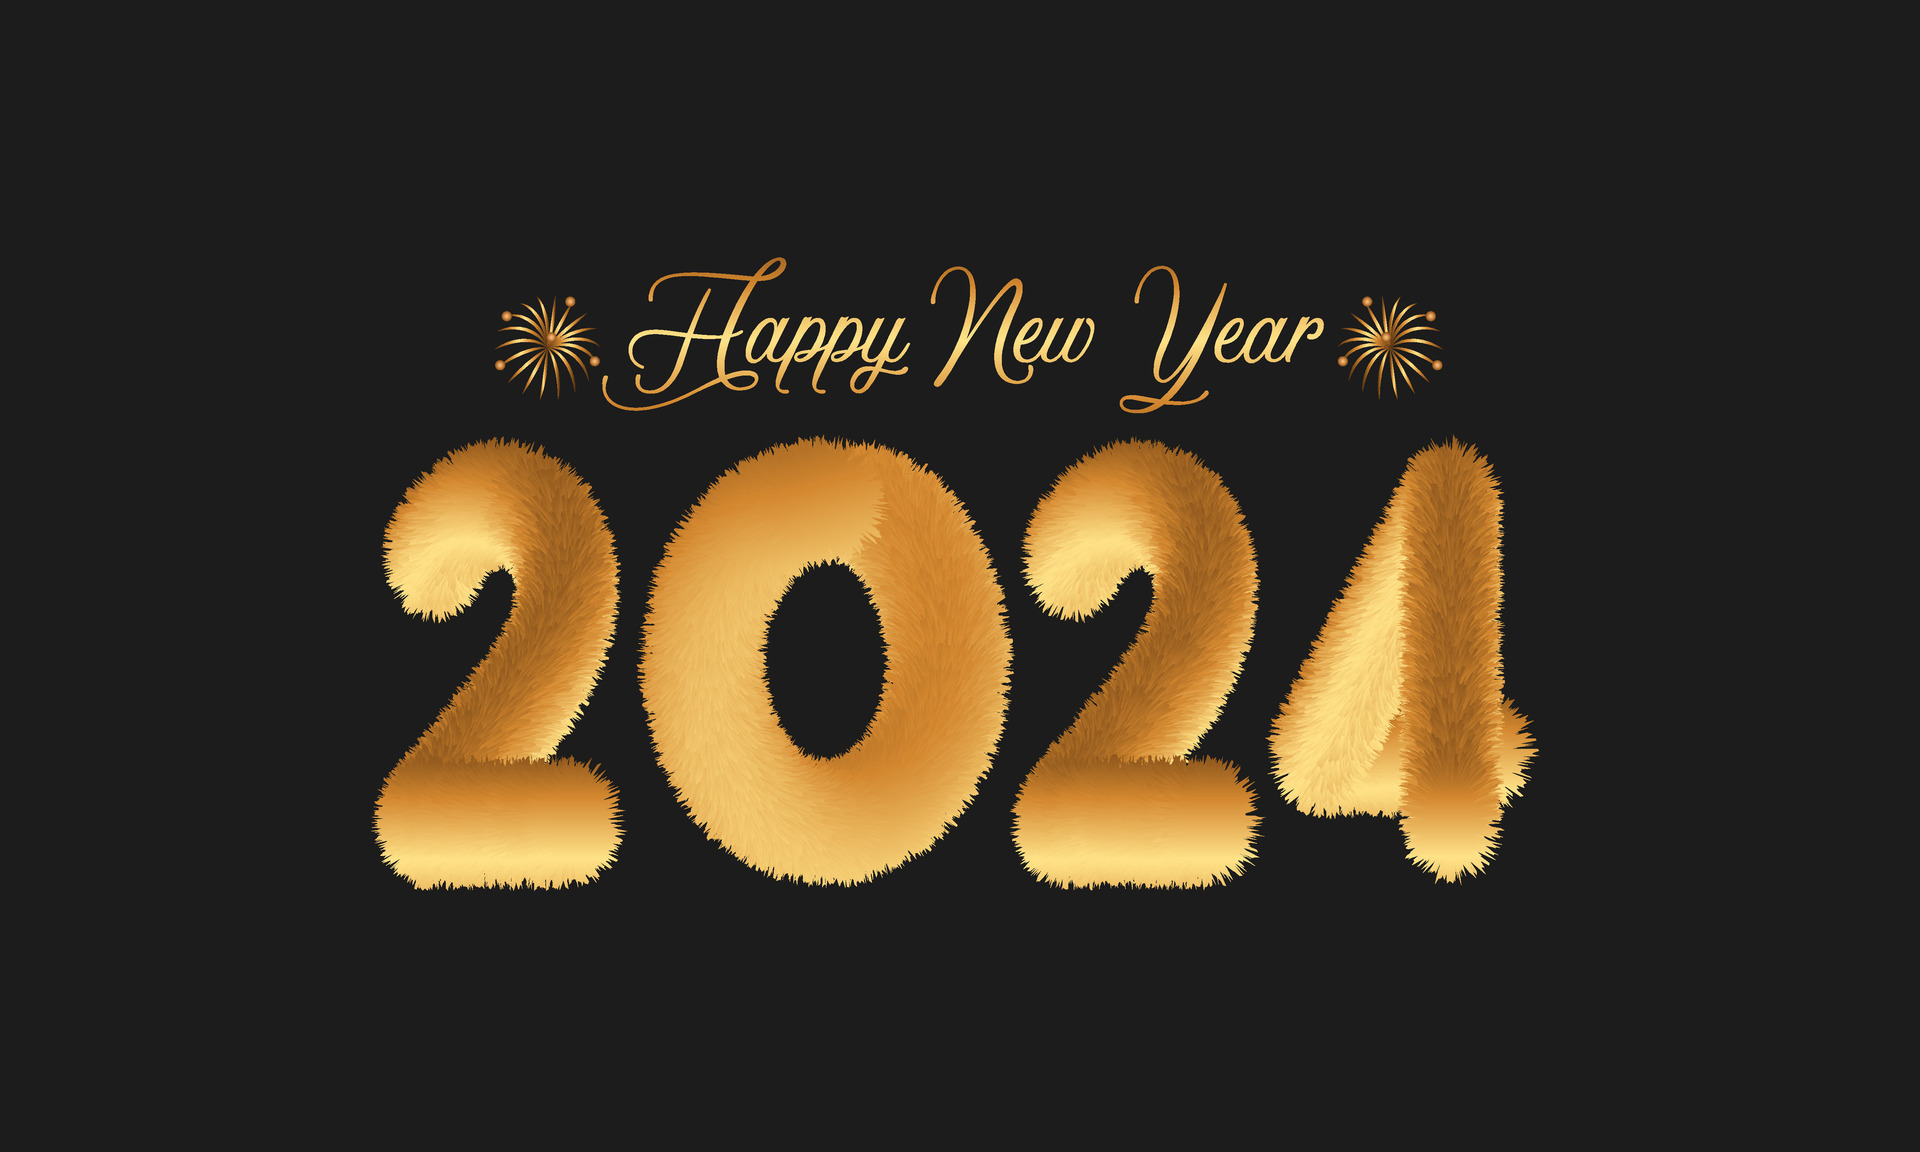 Happy New Year 2023 Free Stock Wallpaper Images 1024x768.jpg